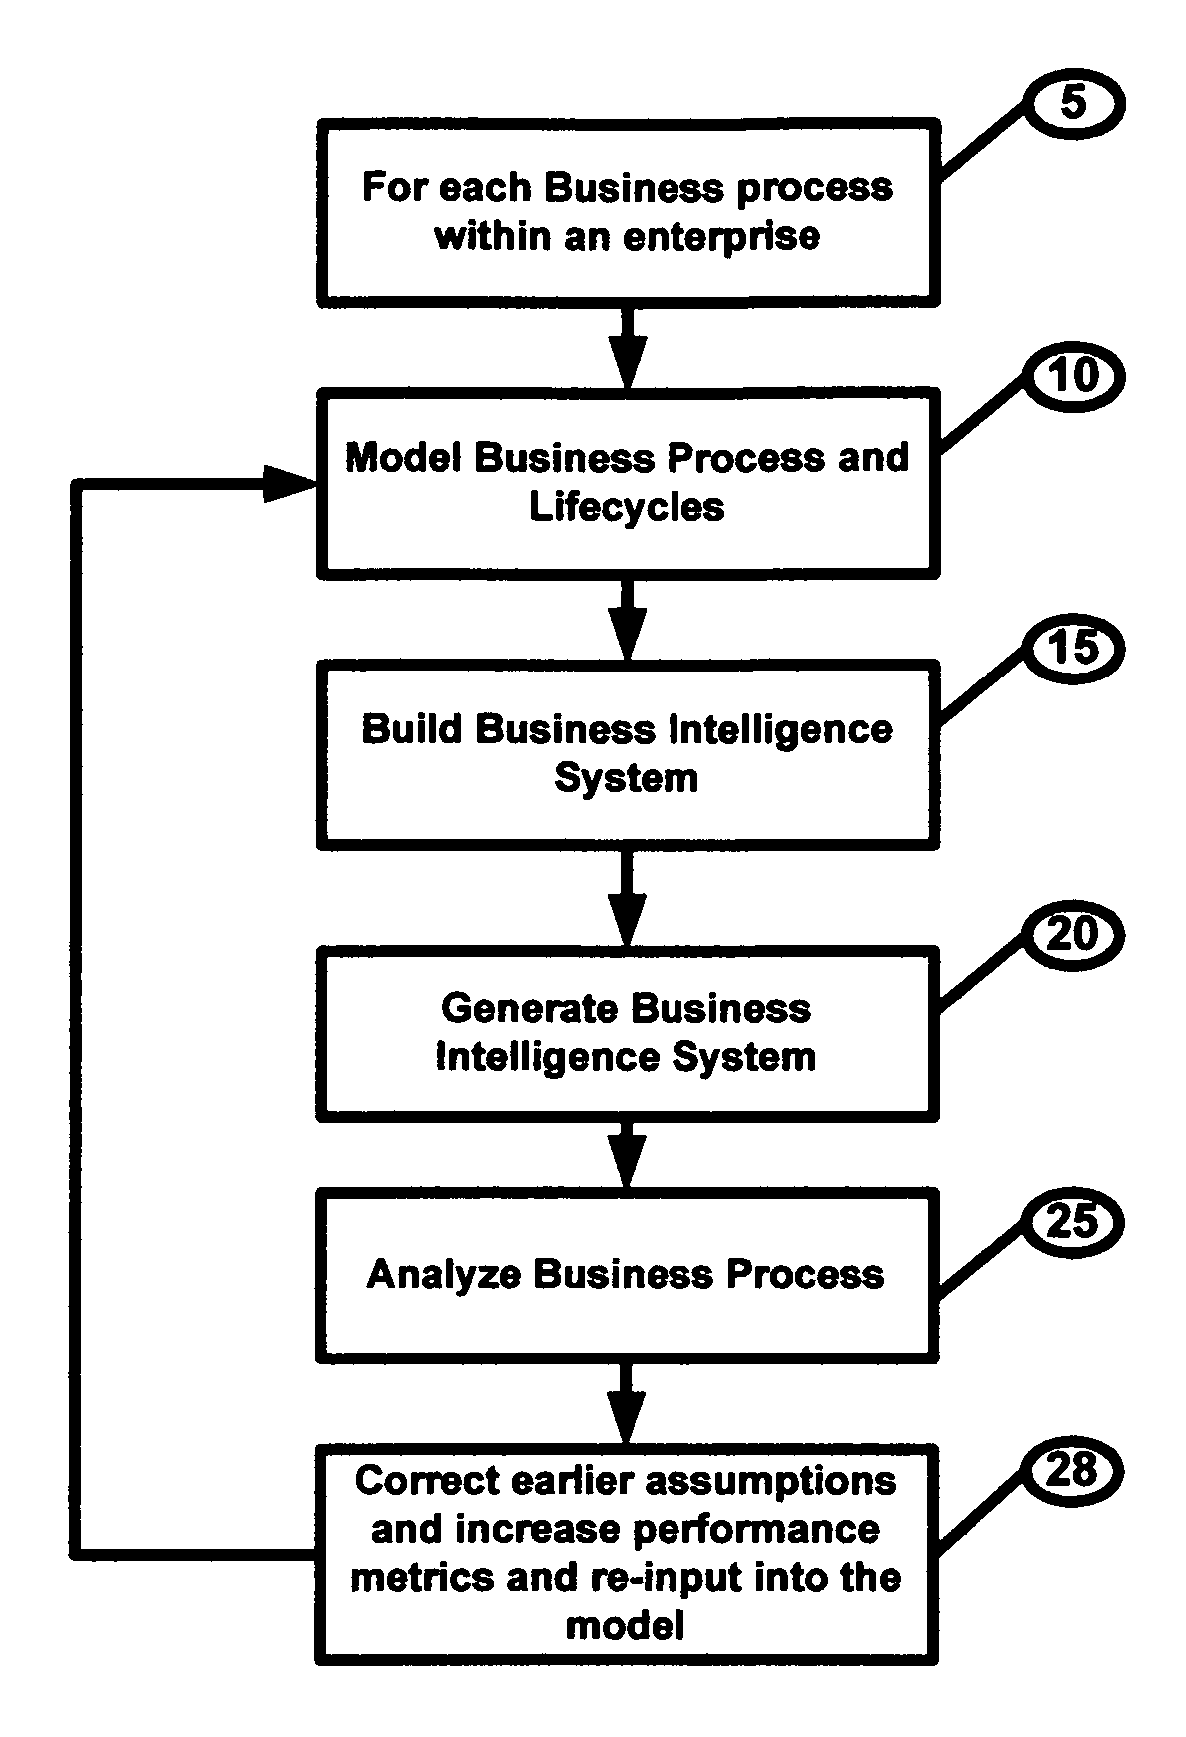 Method and system for generating a business intelligence system based on individual life cycles within a business process